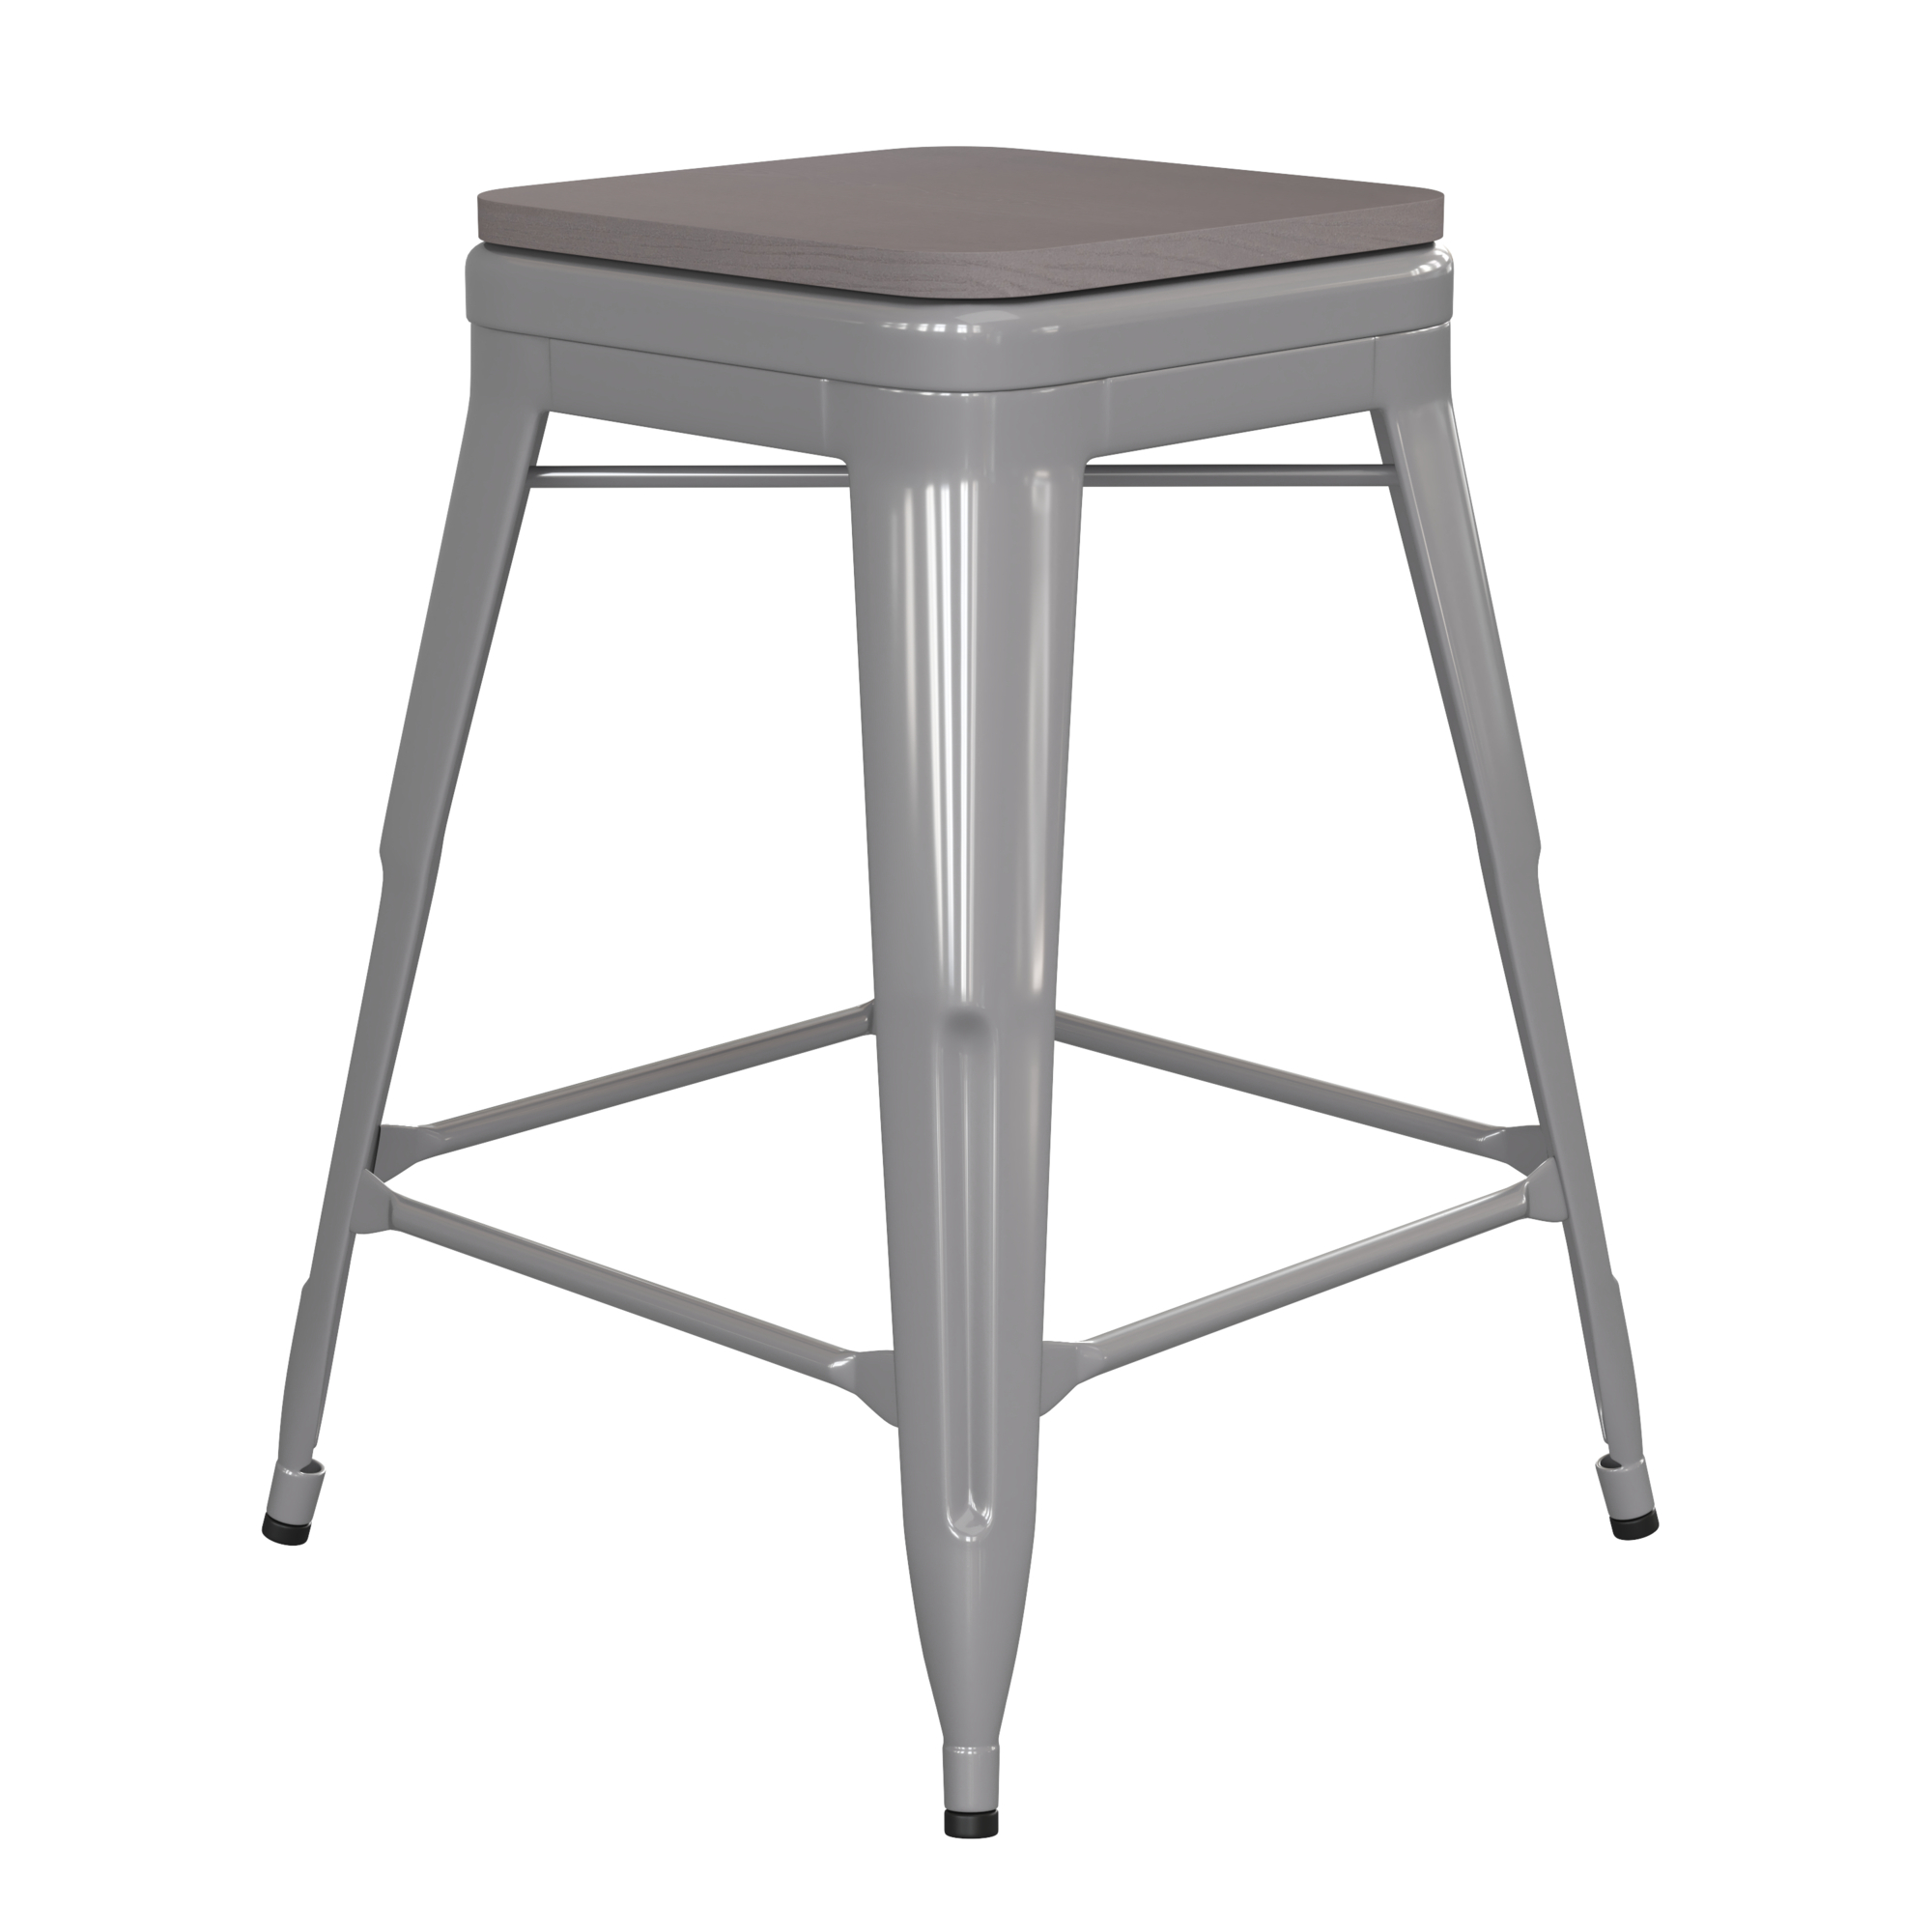 Flash Furniture, 24Inch Silver Metal Stool-Gray Poly Seat, Primary Color Gray, Included (qty.) 1, Model CH3132024SILP2G